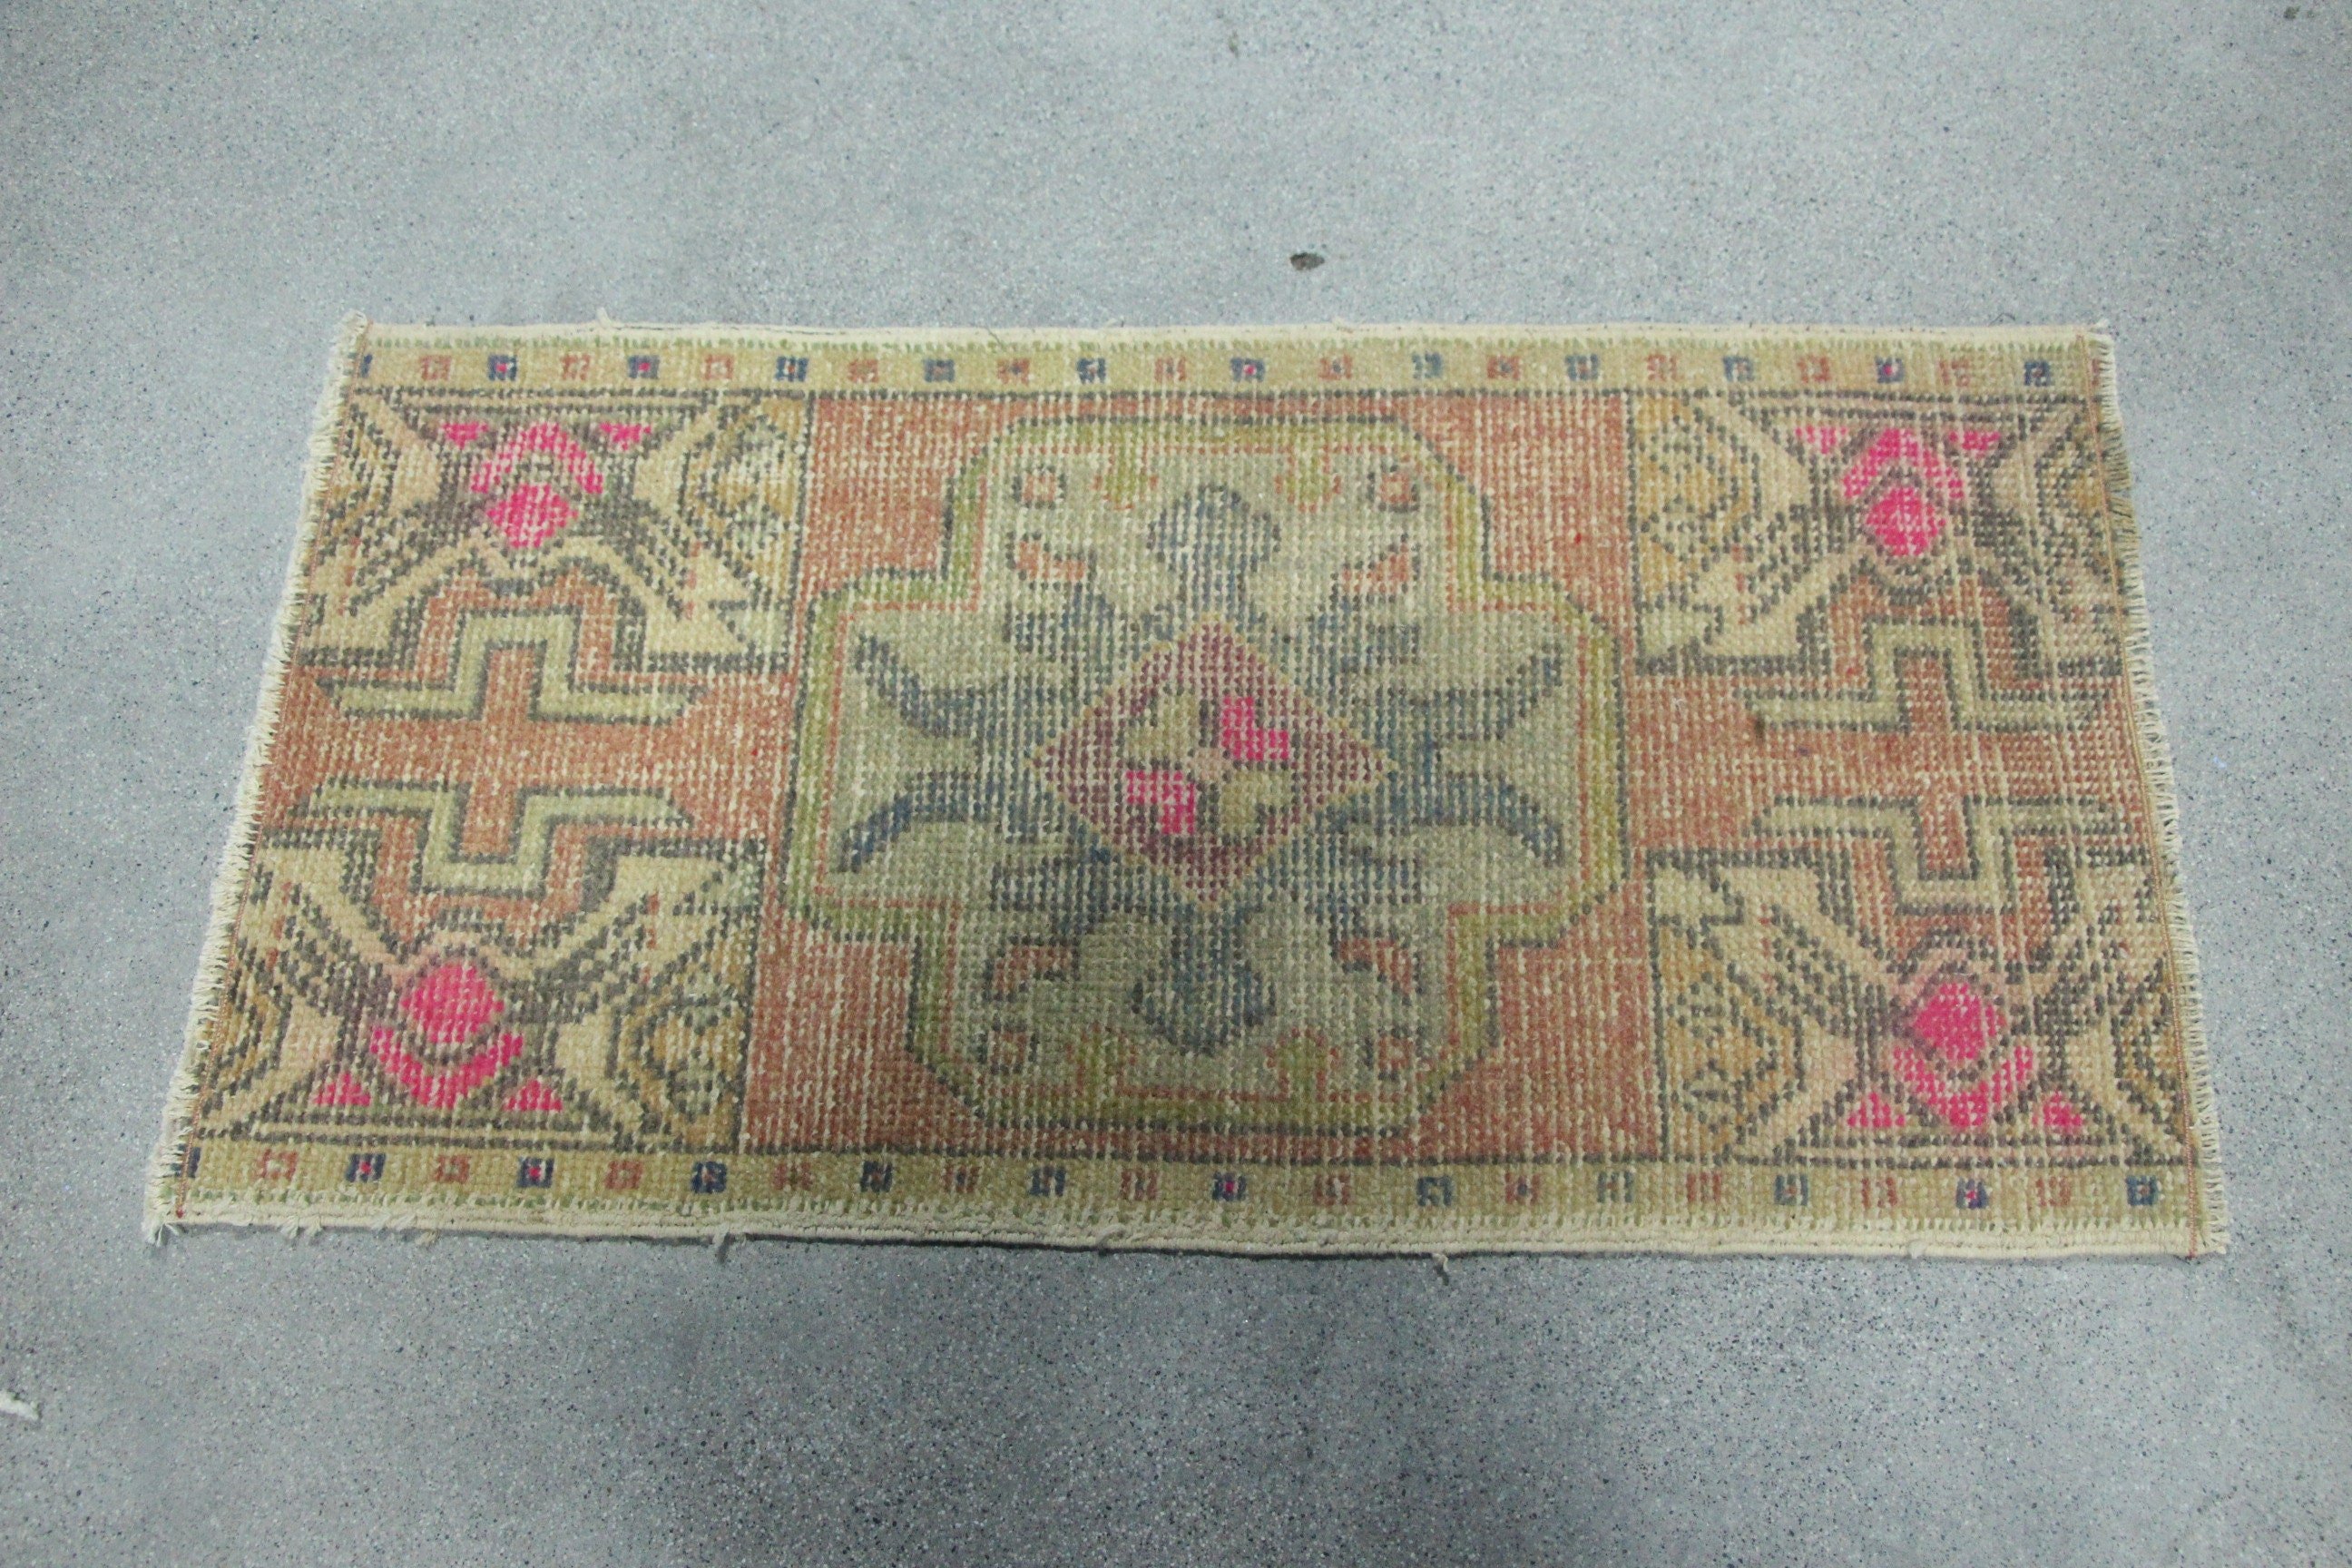 1.7x3.2 ft Small Rug, Cool Rug, Entry Rugs, Orange Antique Rugs, Vintage Rug, Turkish Rug, Wall Hanging Rug, Hand Woven Rugs, Moroccan Rug